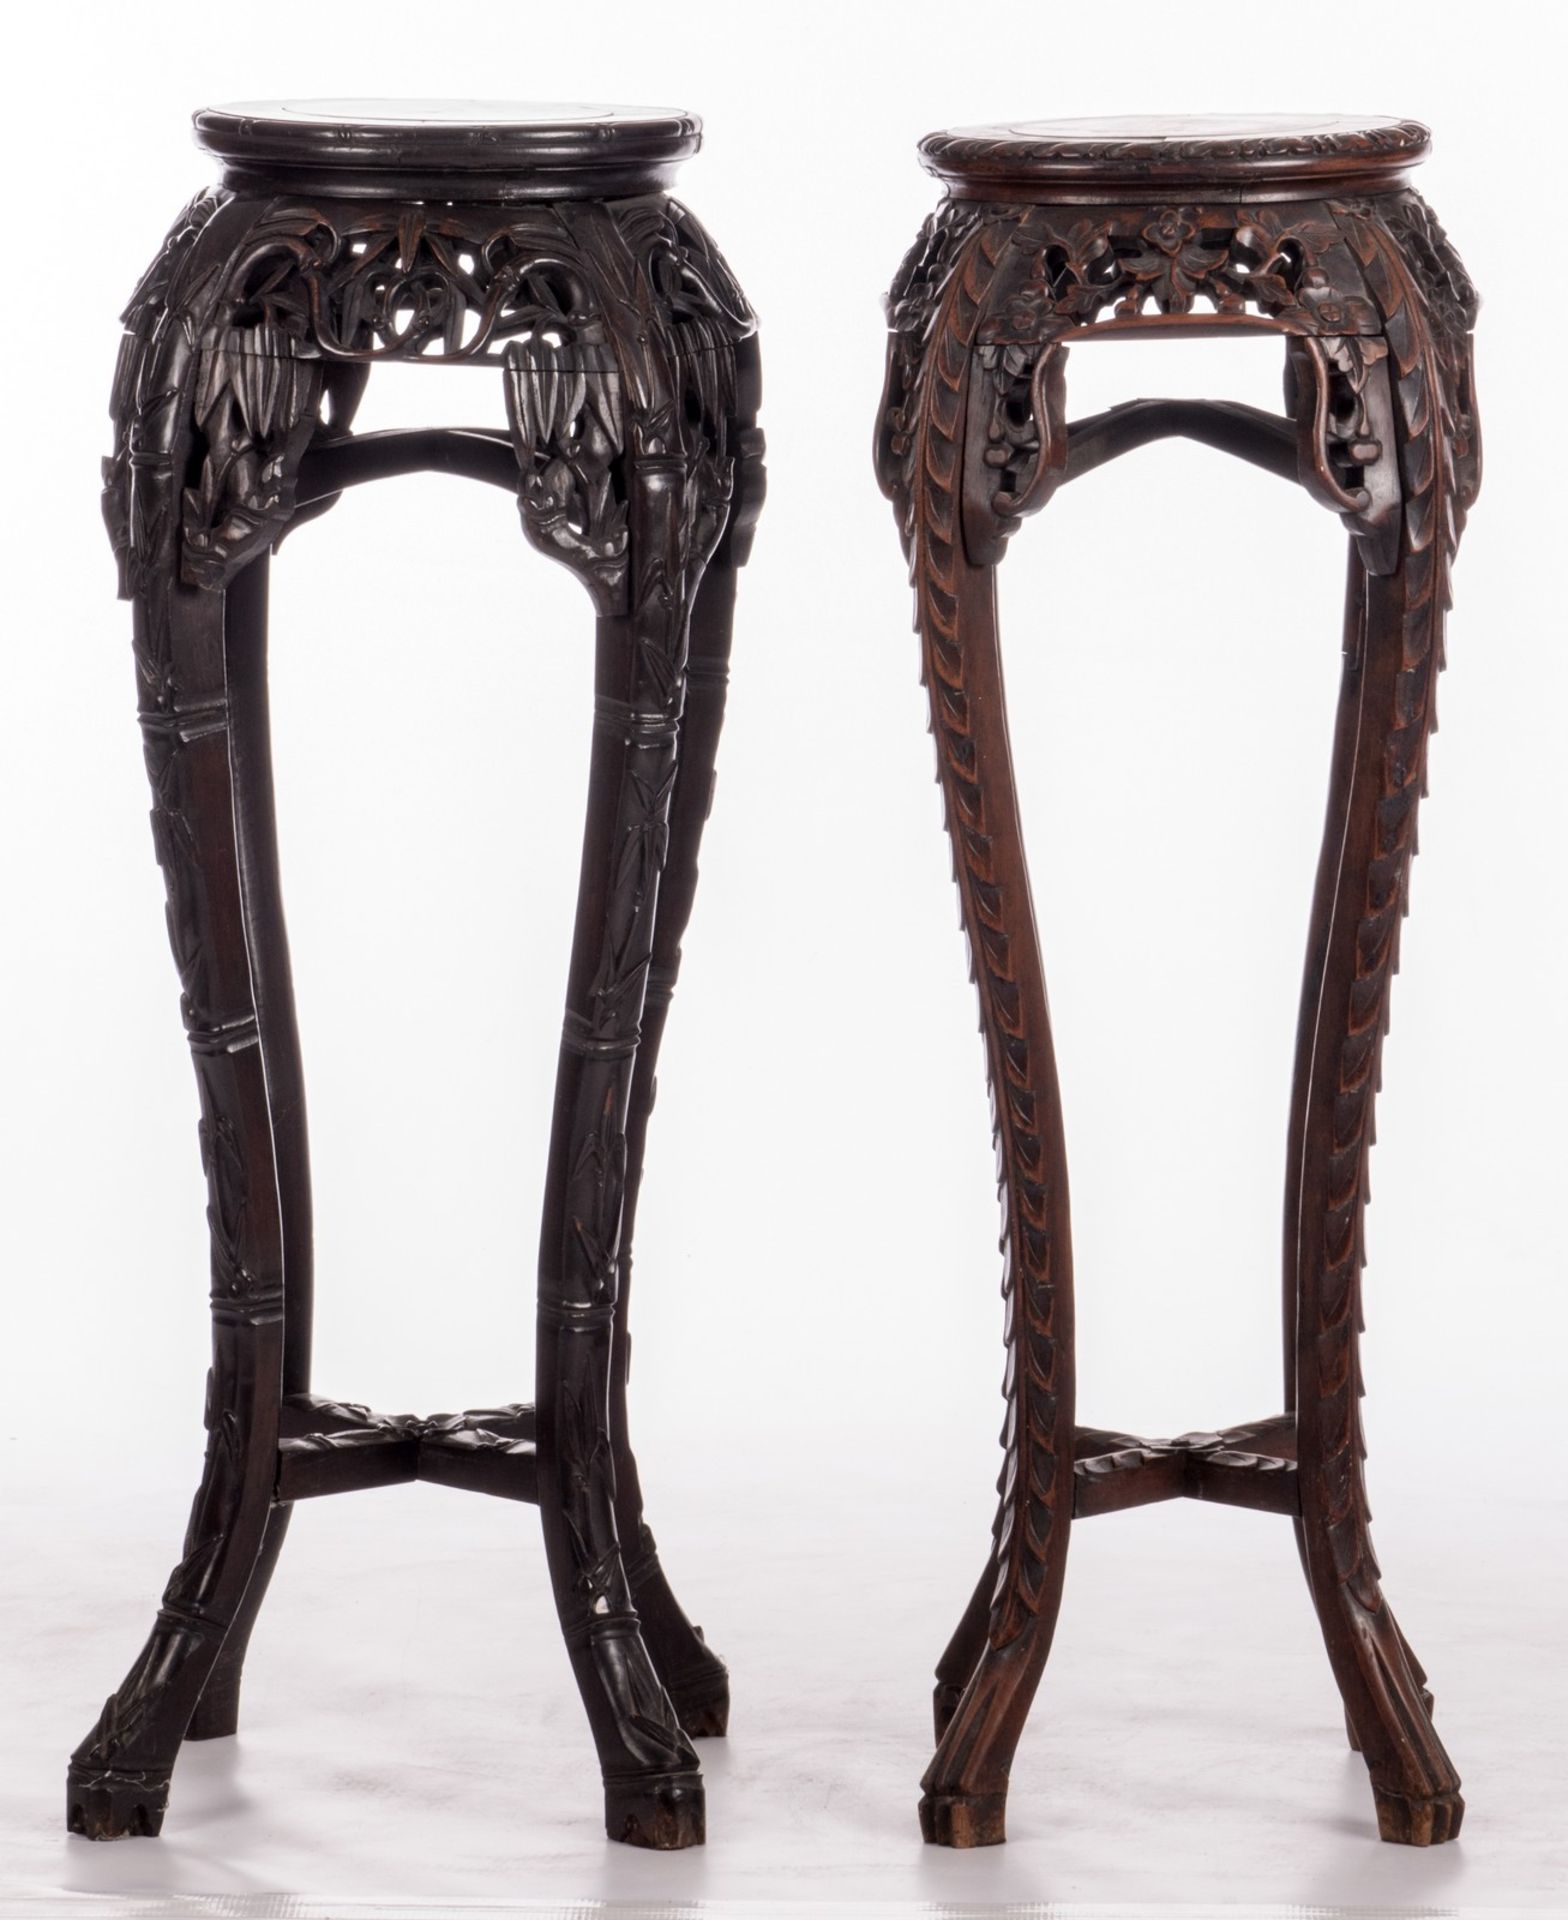 Two Chinese carved hardwood stools with marble top, about 1900, H 91 - 92 cm, Diameter 39 - 41 cm ( - Bild 3 aus 9